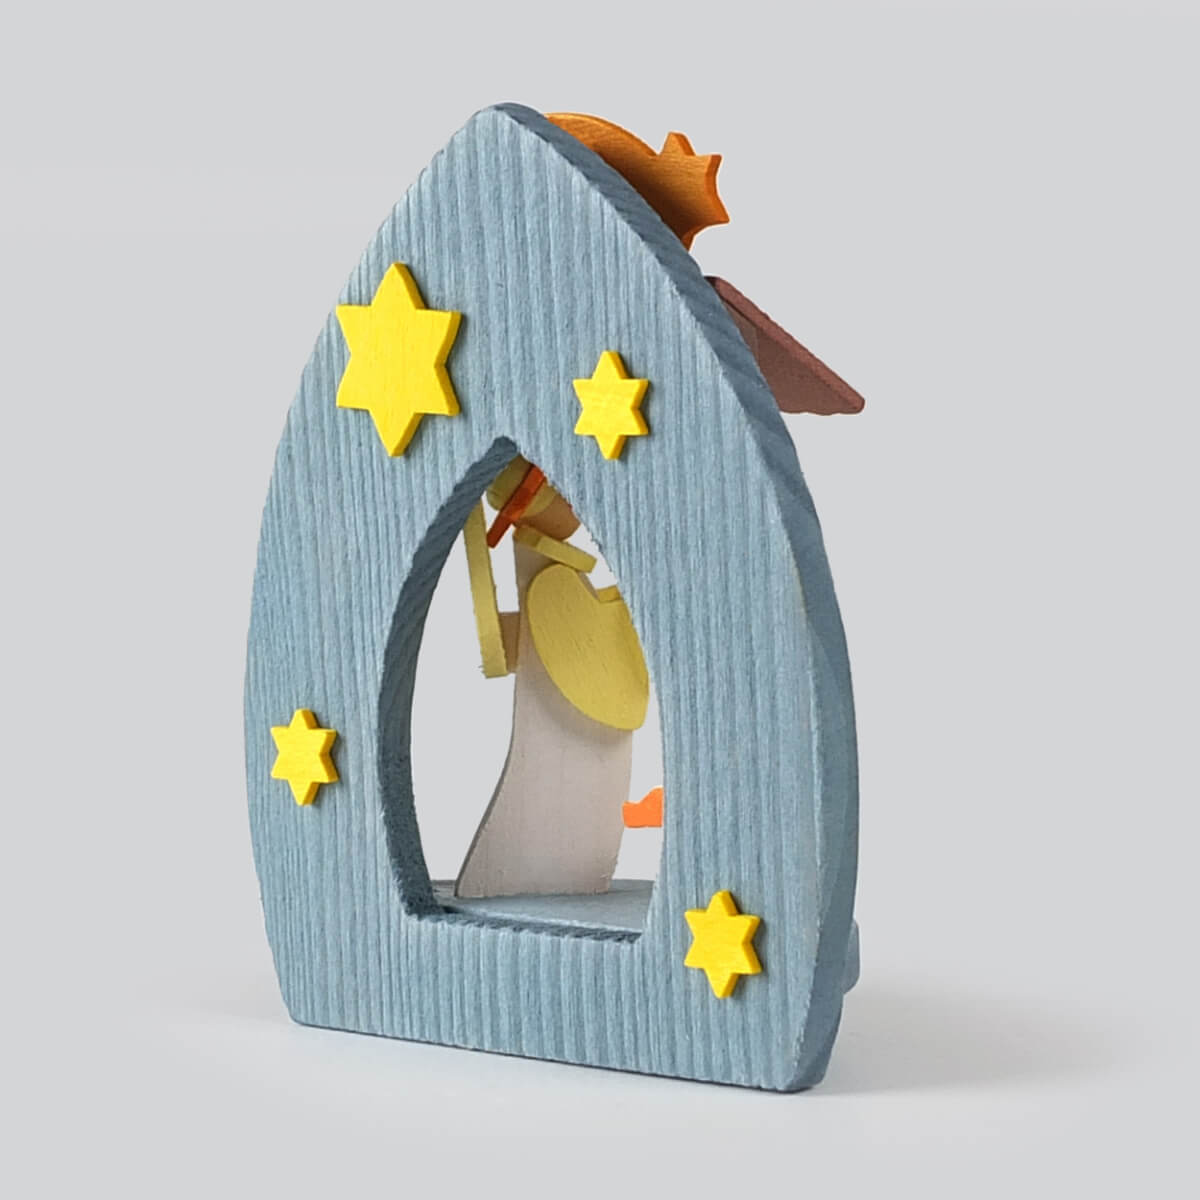 Manger 'The Nativity' Ornament with holy family